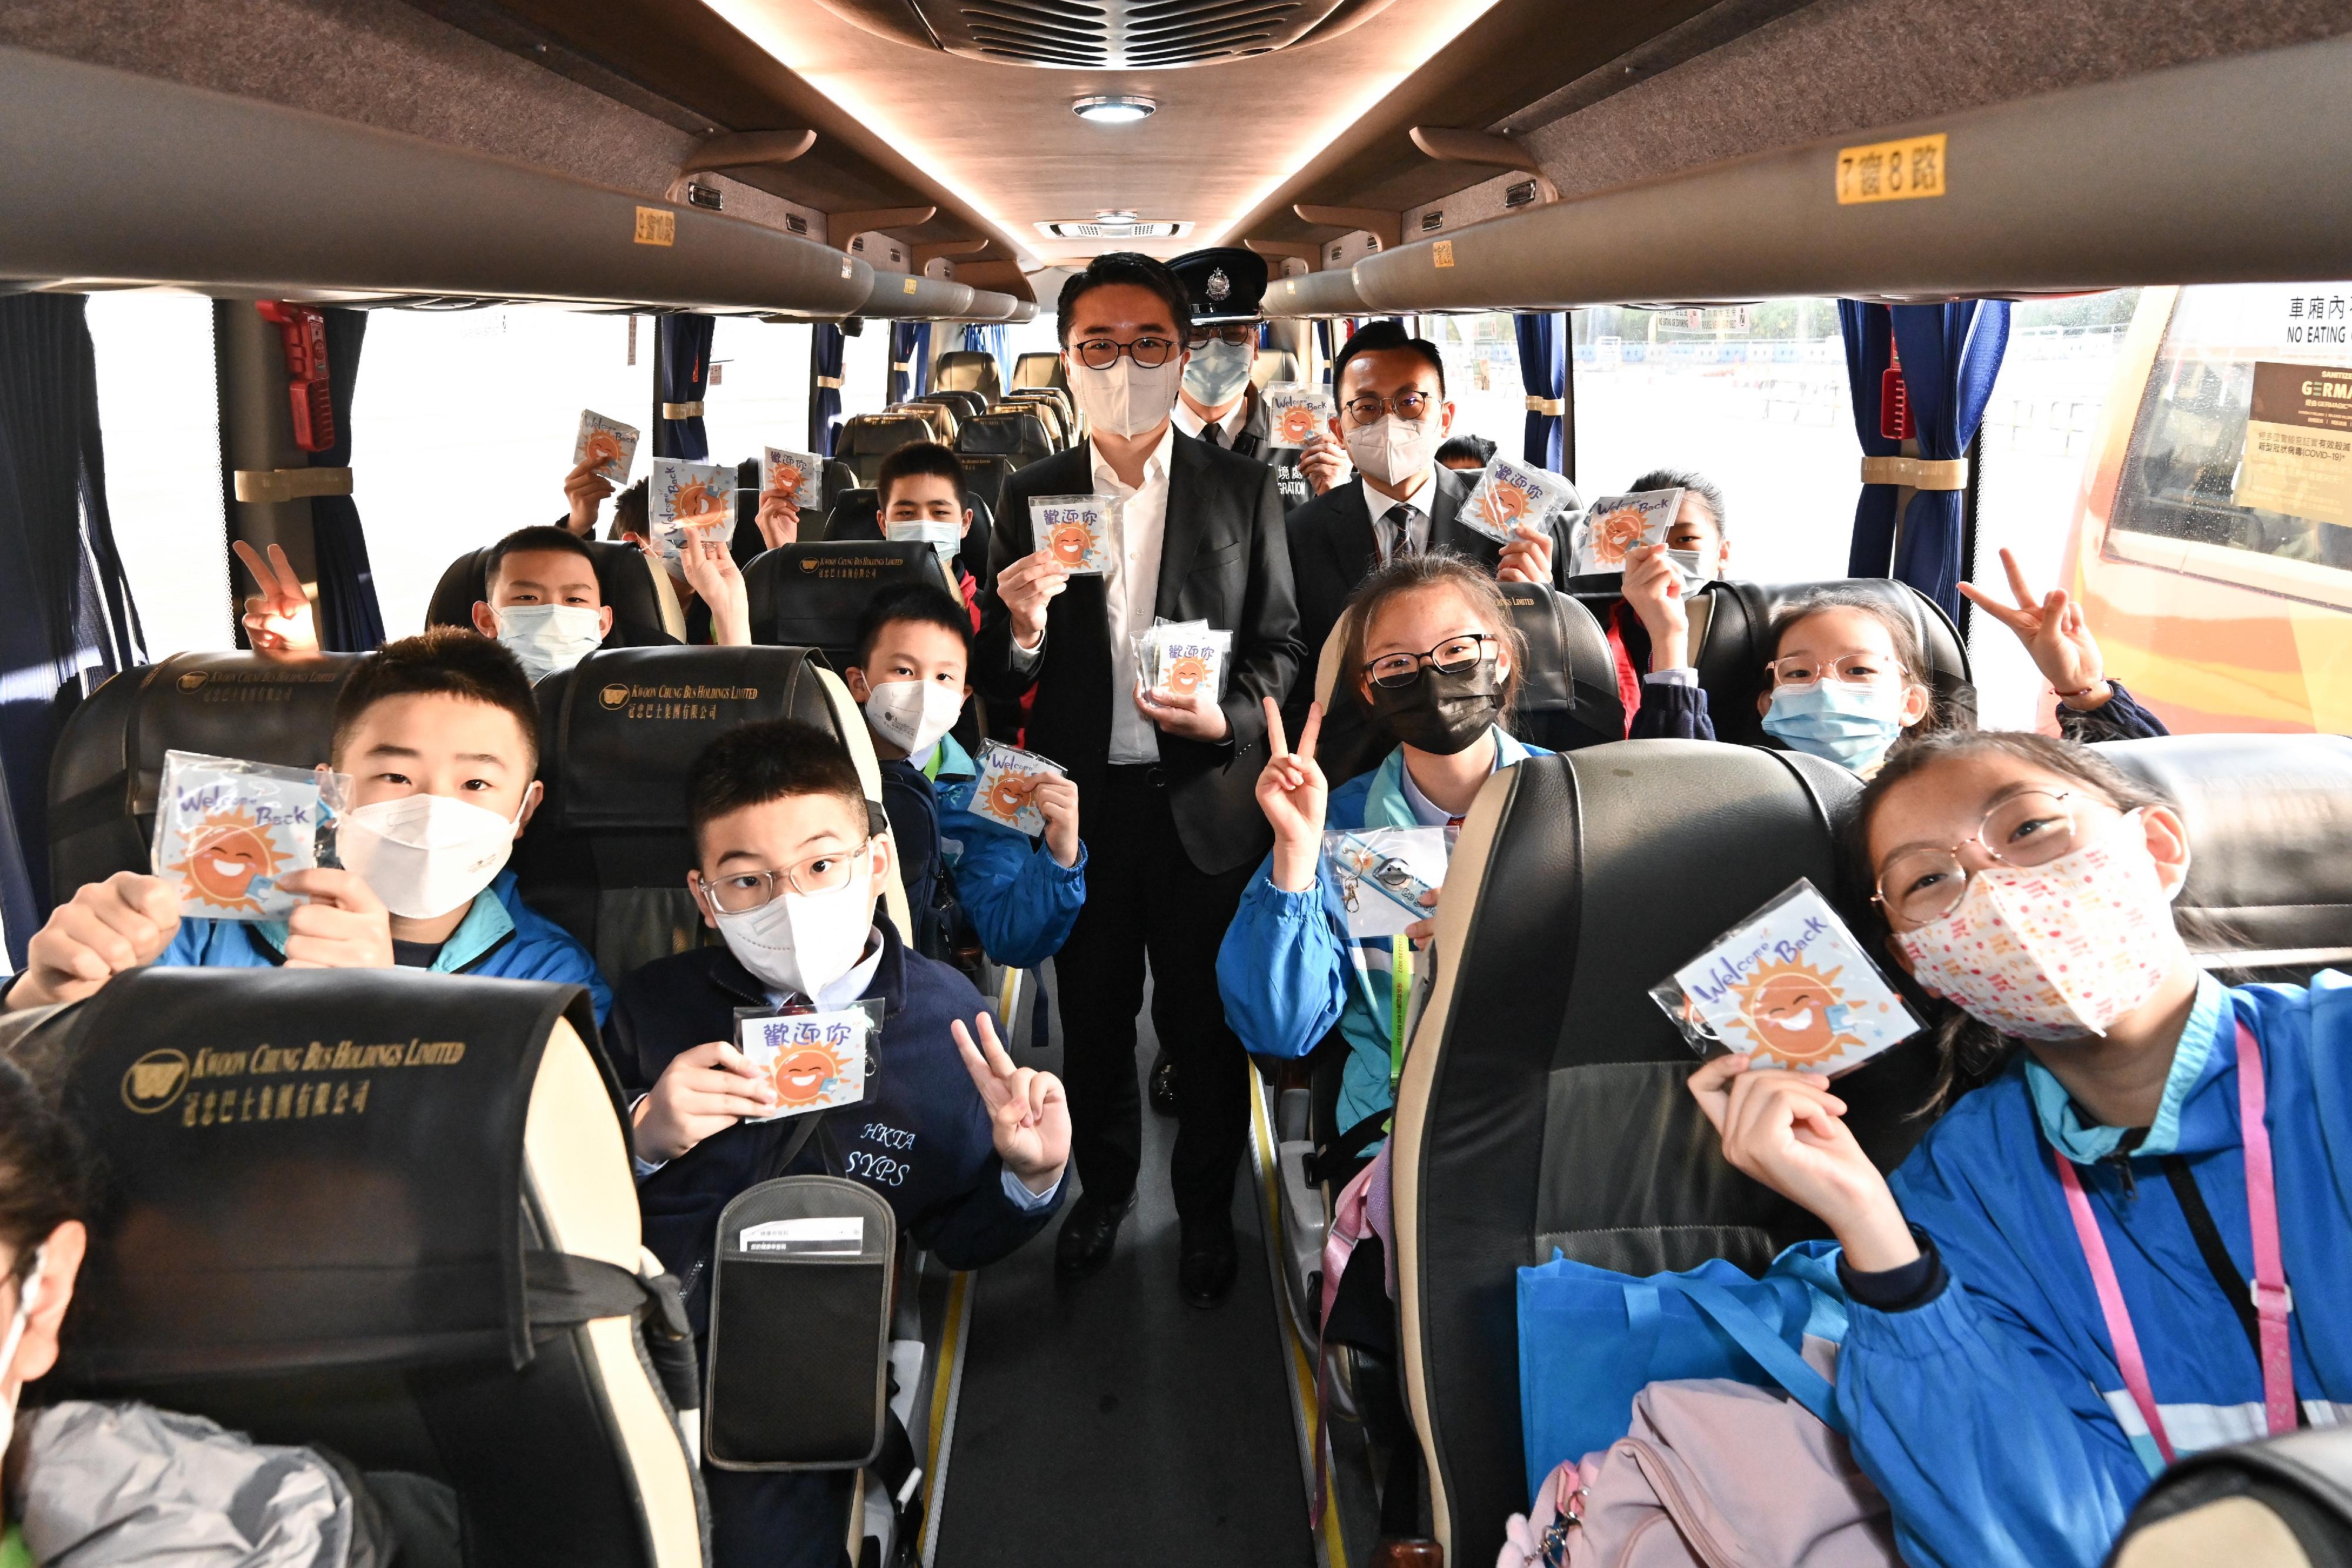 The Under Secretary for Education, Mr Sze Chun-fai, visited the Lok Ma Chau/Huanggang Control Point this morning (February 22) to learn about the operation of cross-boundary school coaches. Photo shows Mr Sze (centre) with cross-boundary students in a school coach.